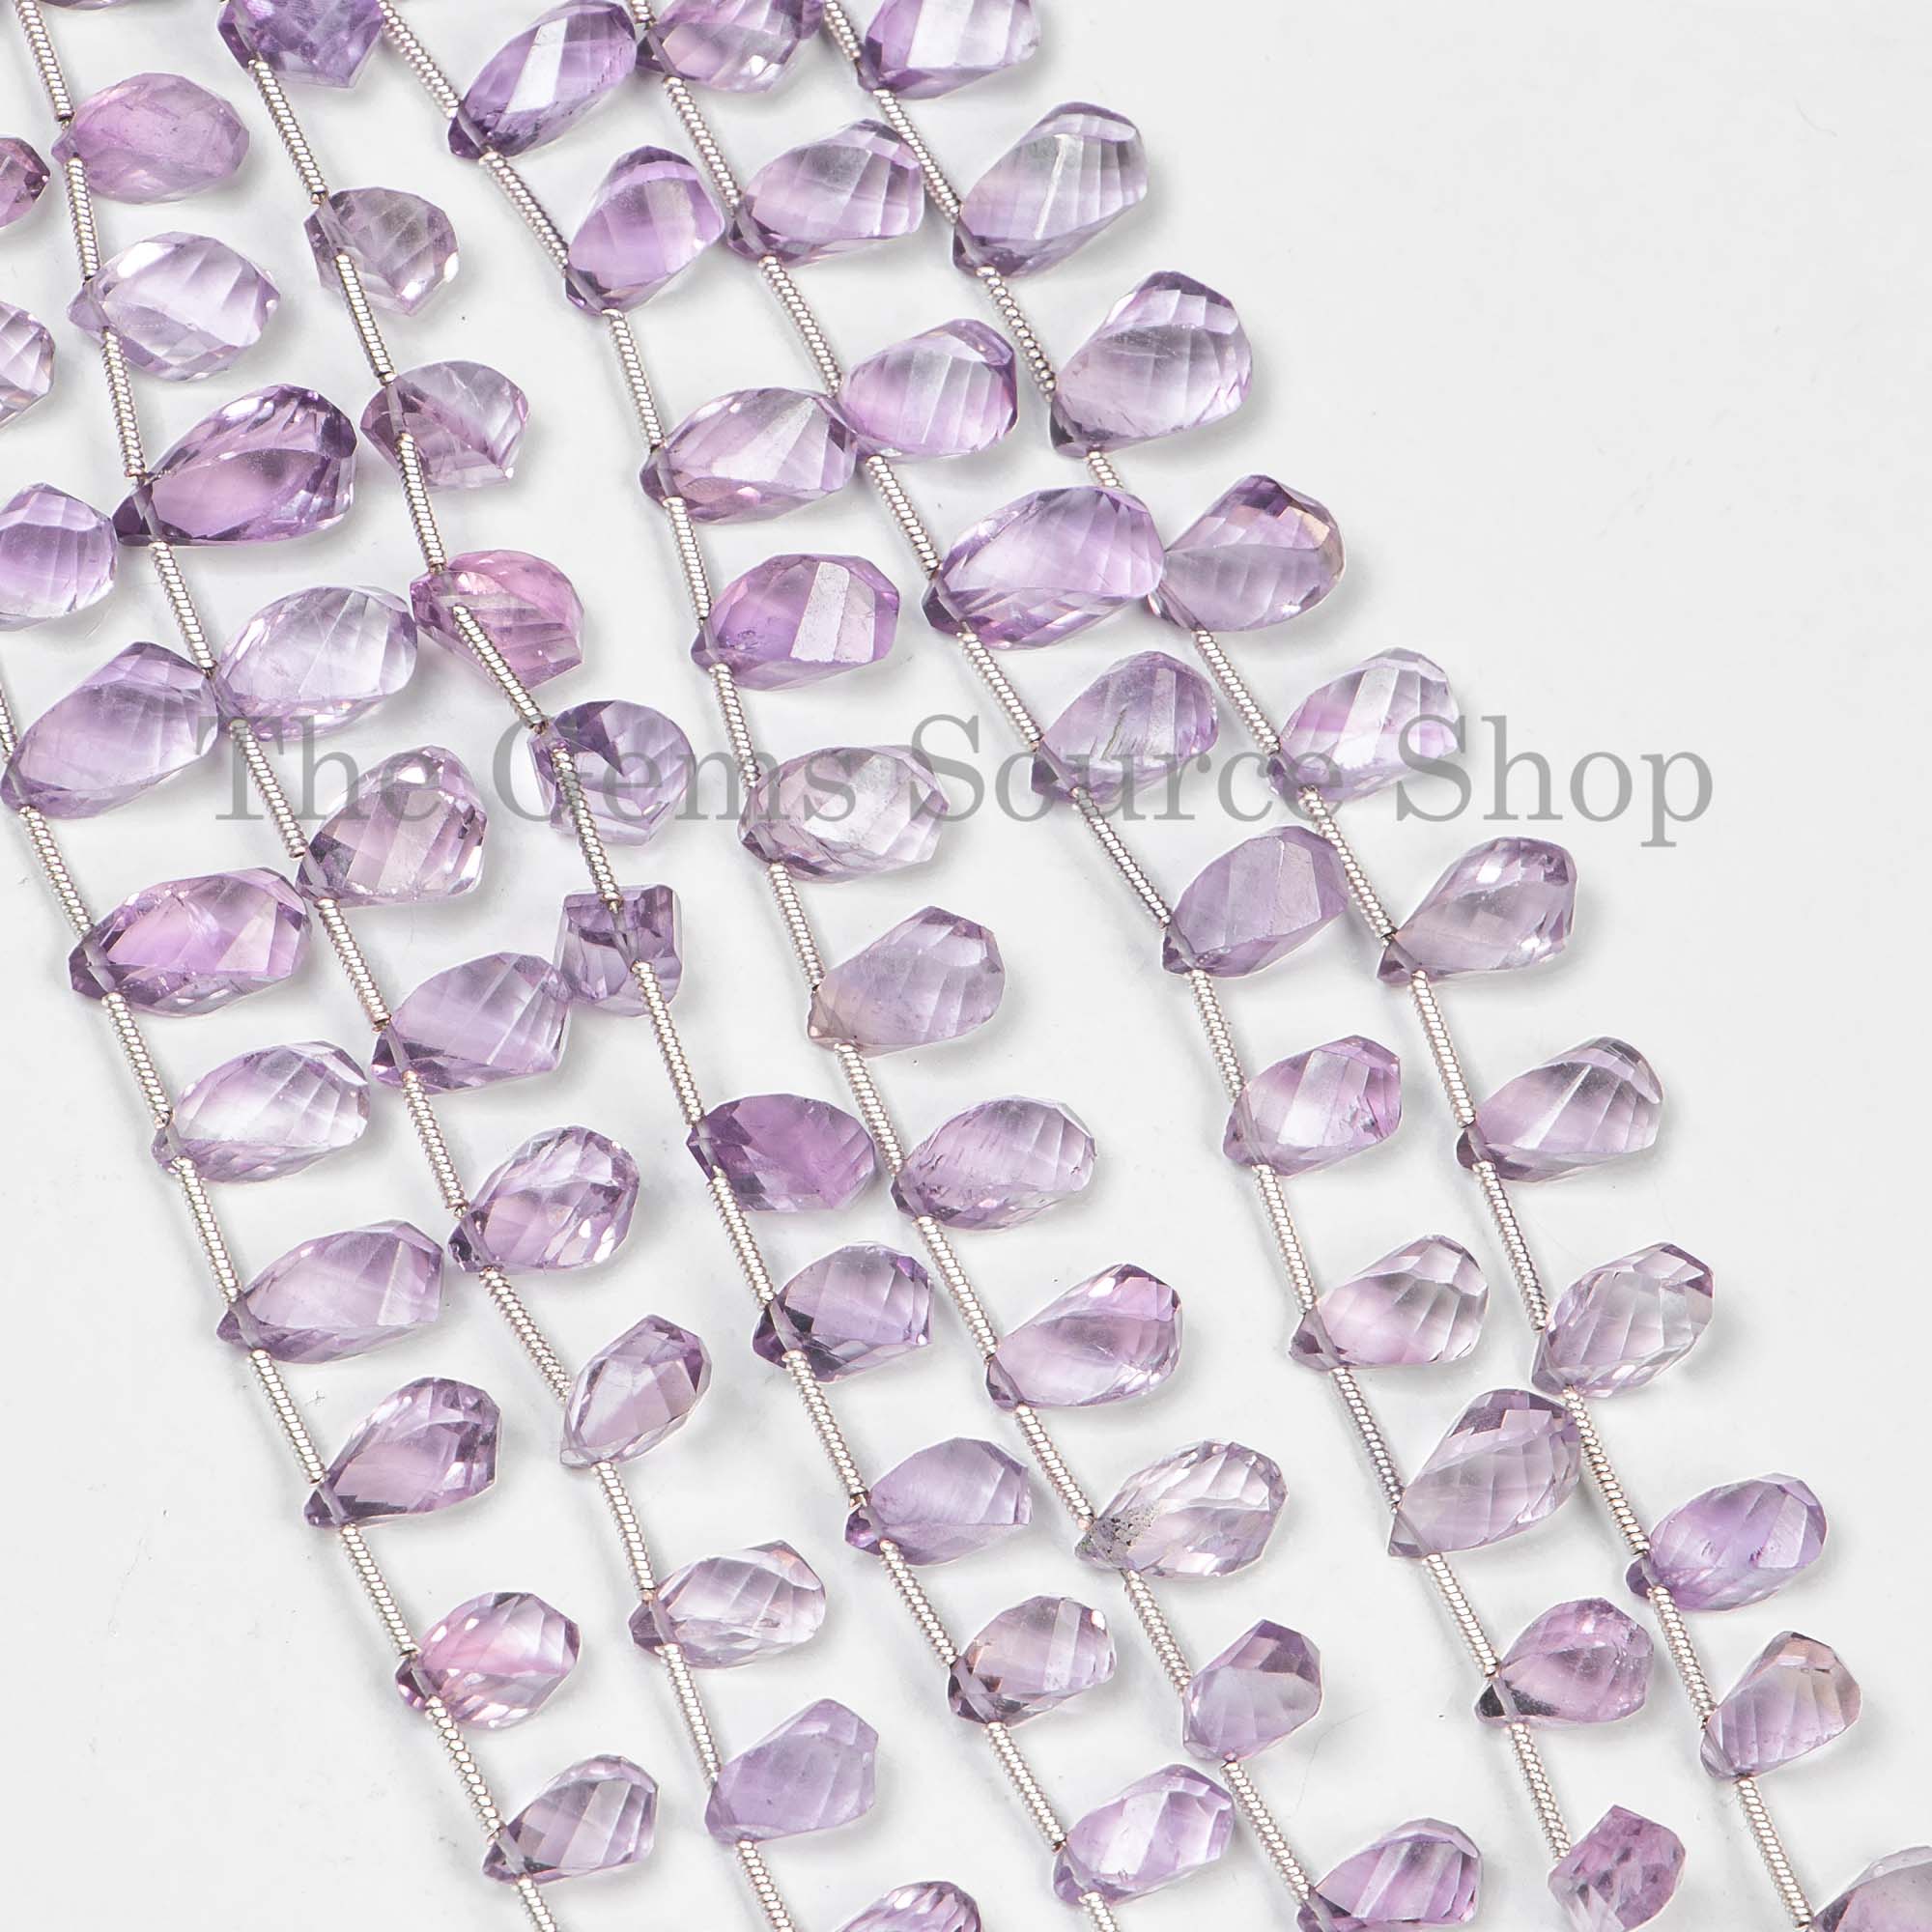 Amethyst Beads, Amethyst Twisted Drops Beads, Fancy Beads, Amethyst, Faceted Beads